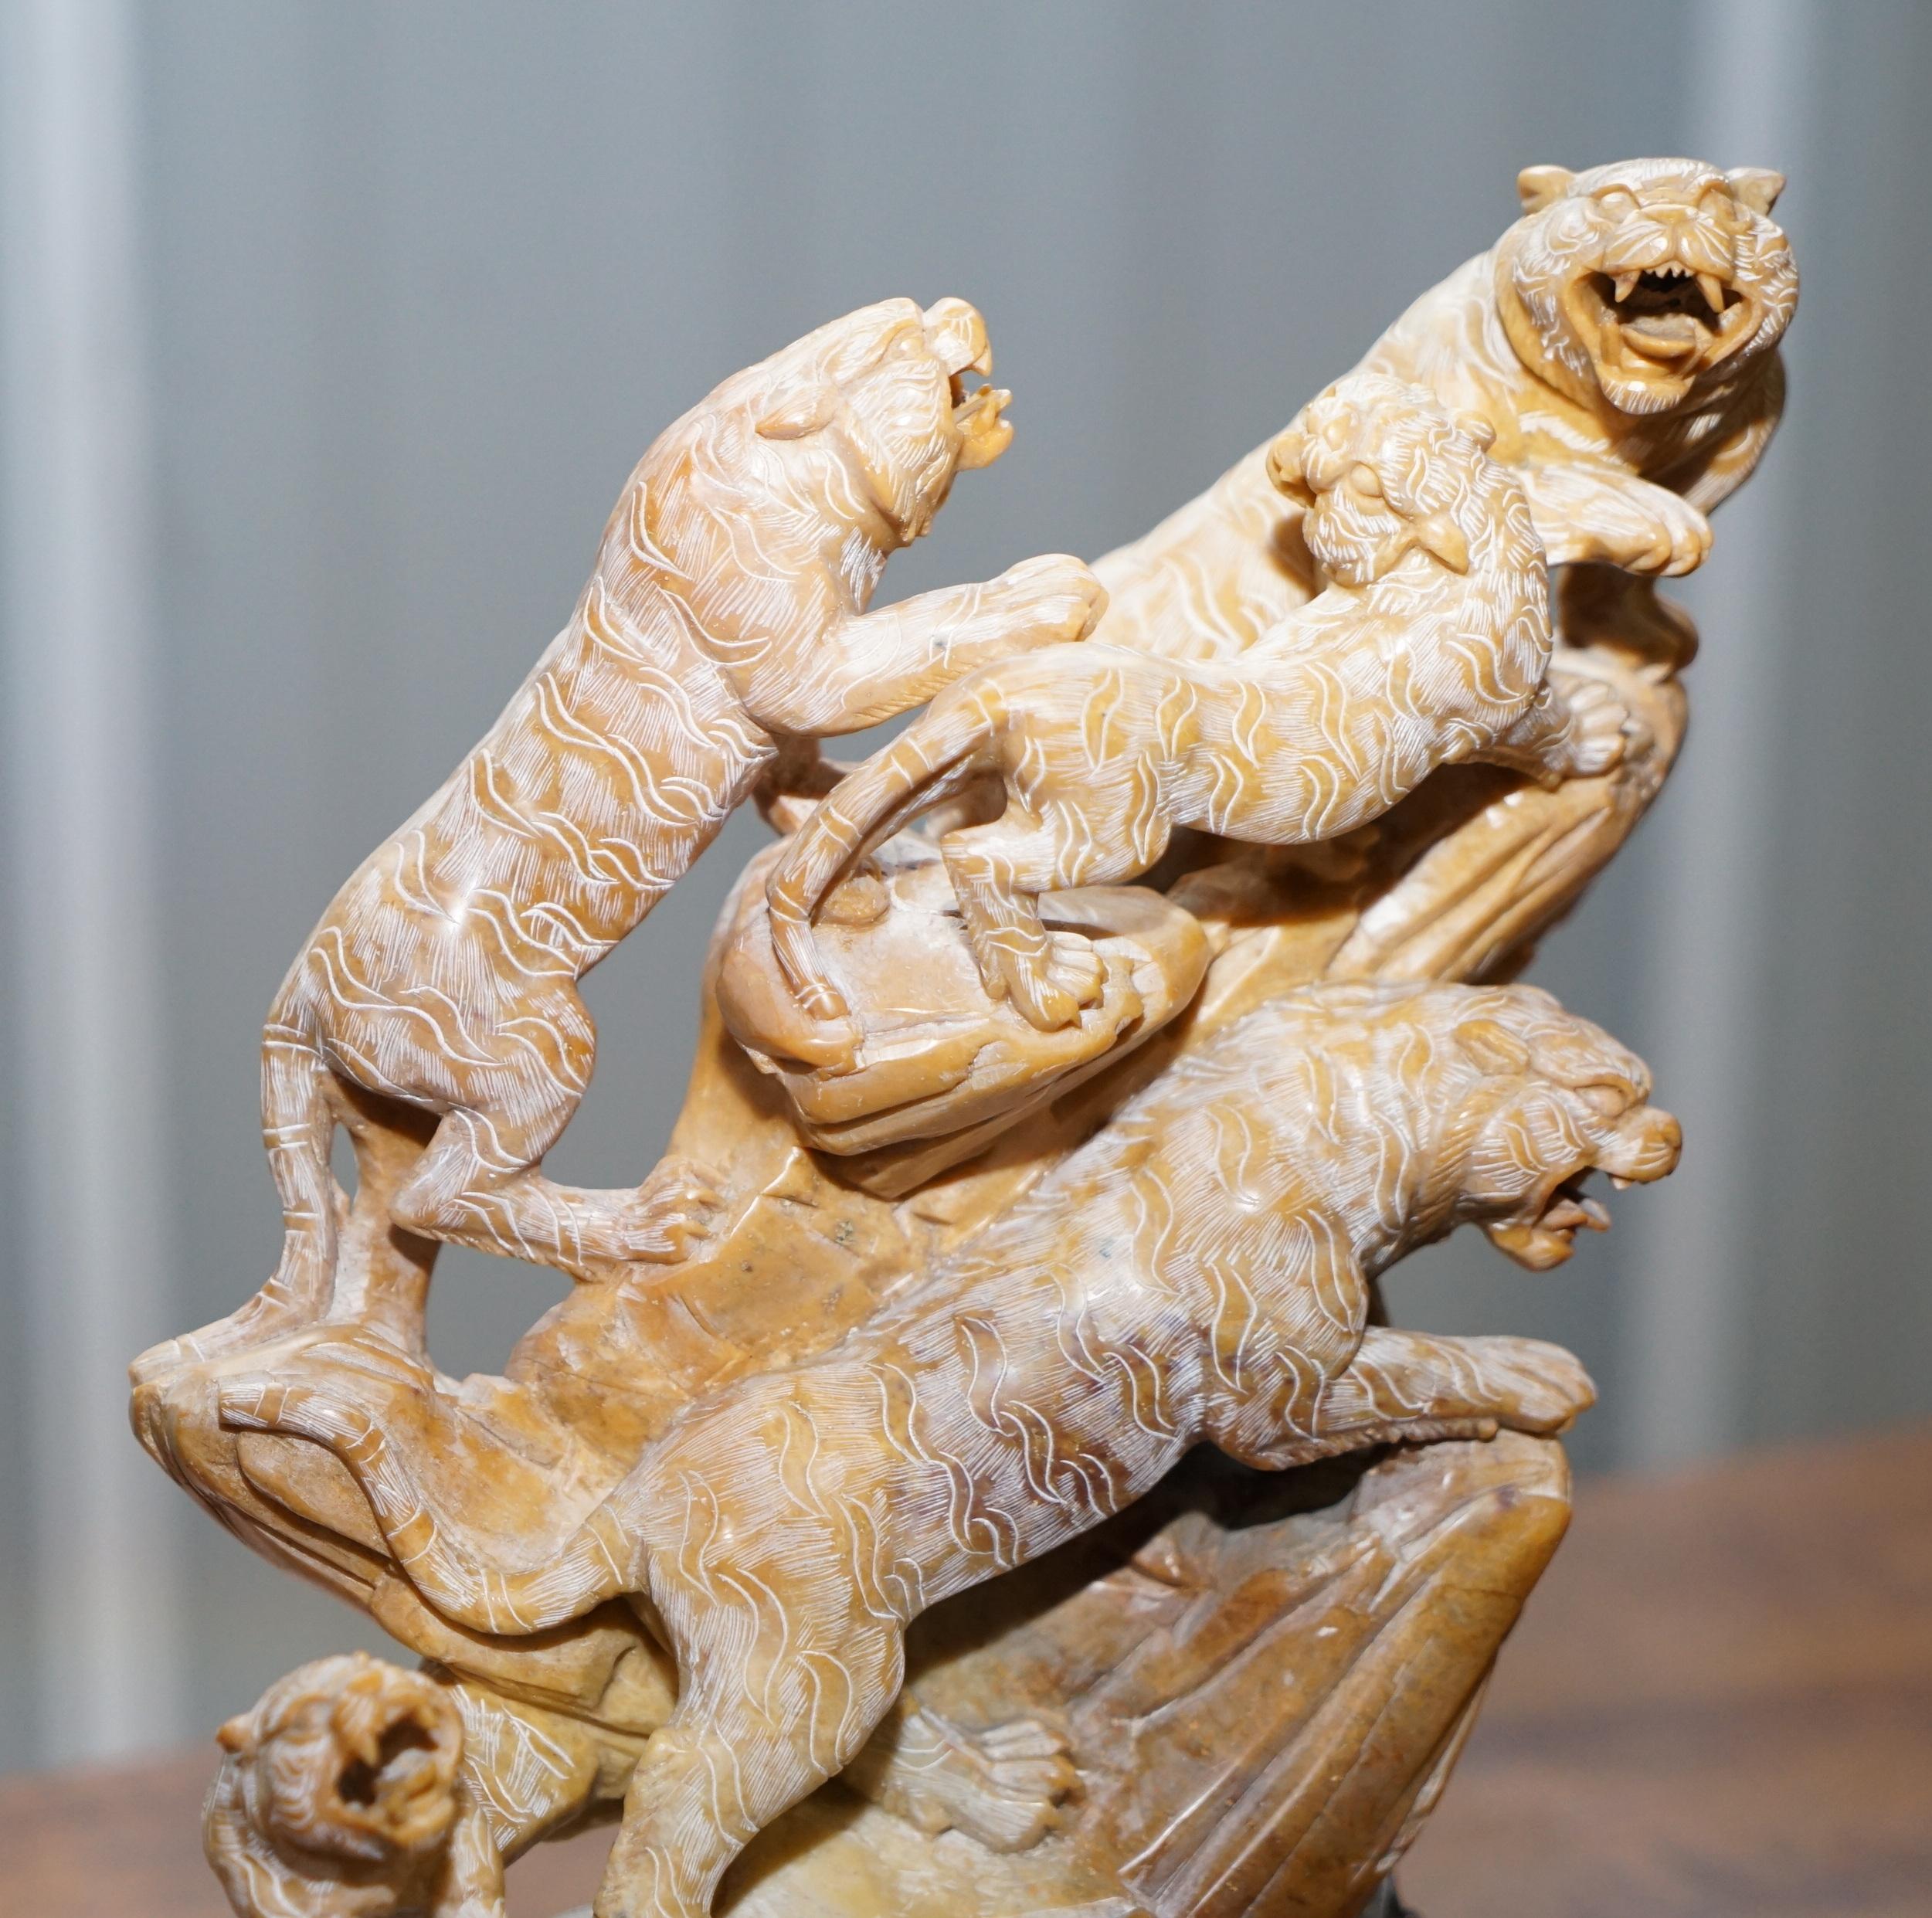 Hand-Crafted Rare Large Chinese Export circa 1900 Shoushan Stone Sculpture Pandas Crane Birds For Sale